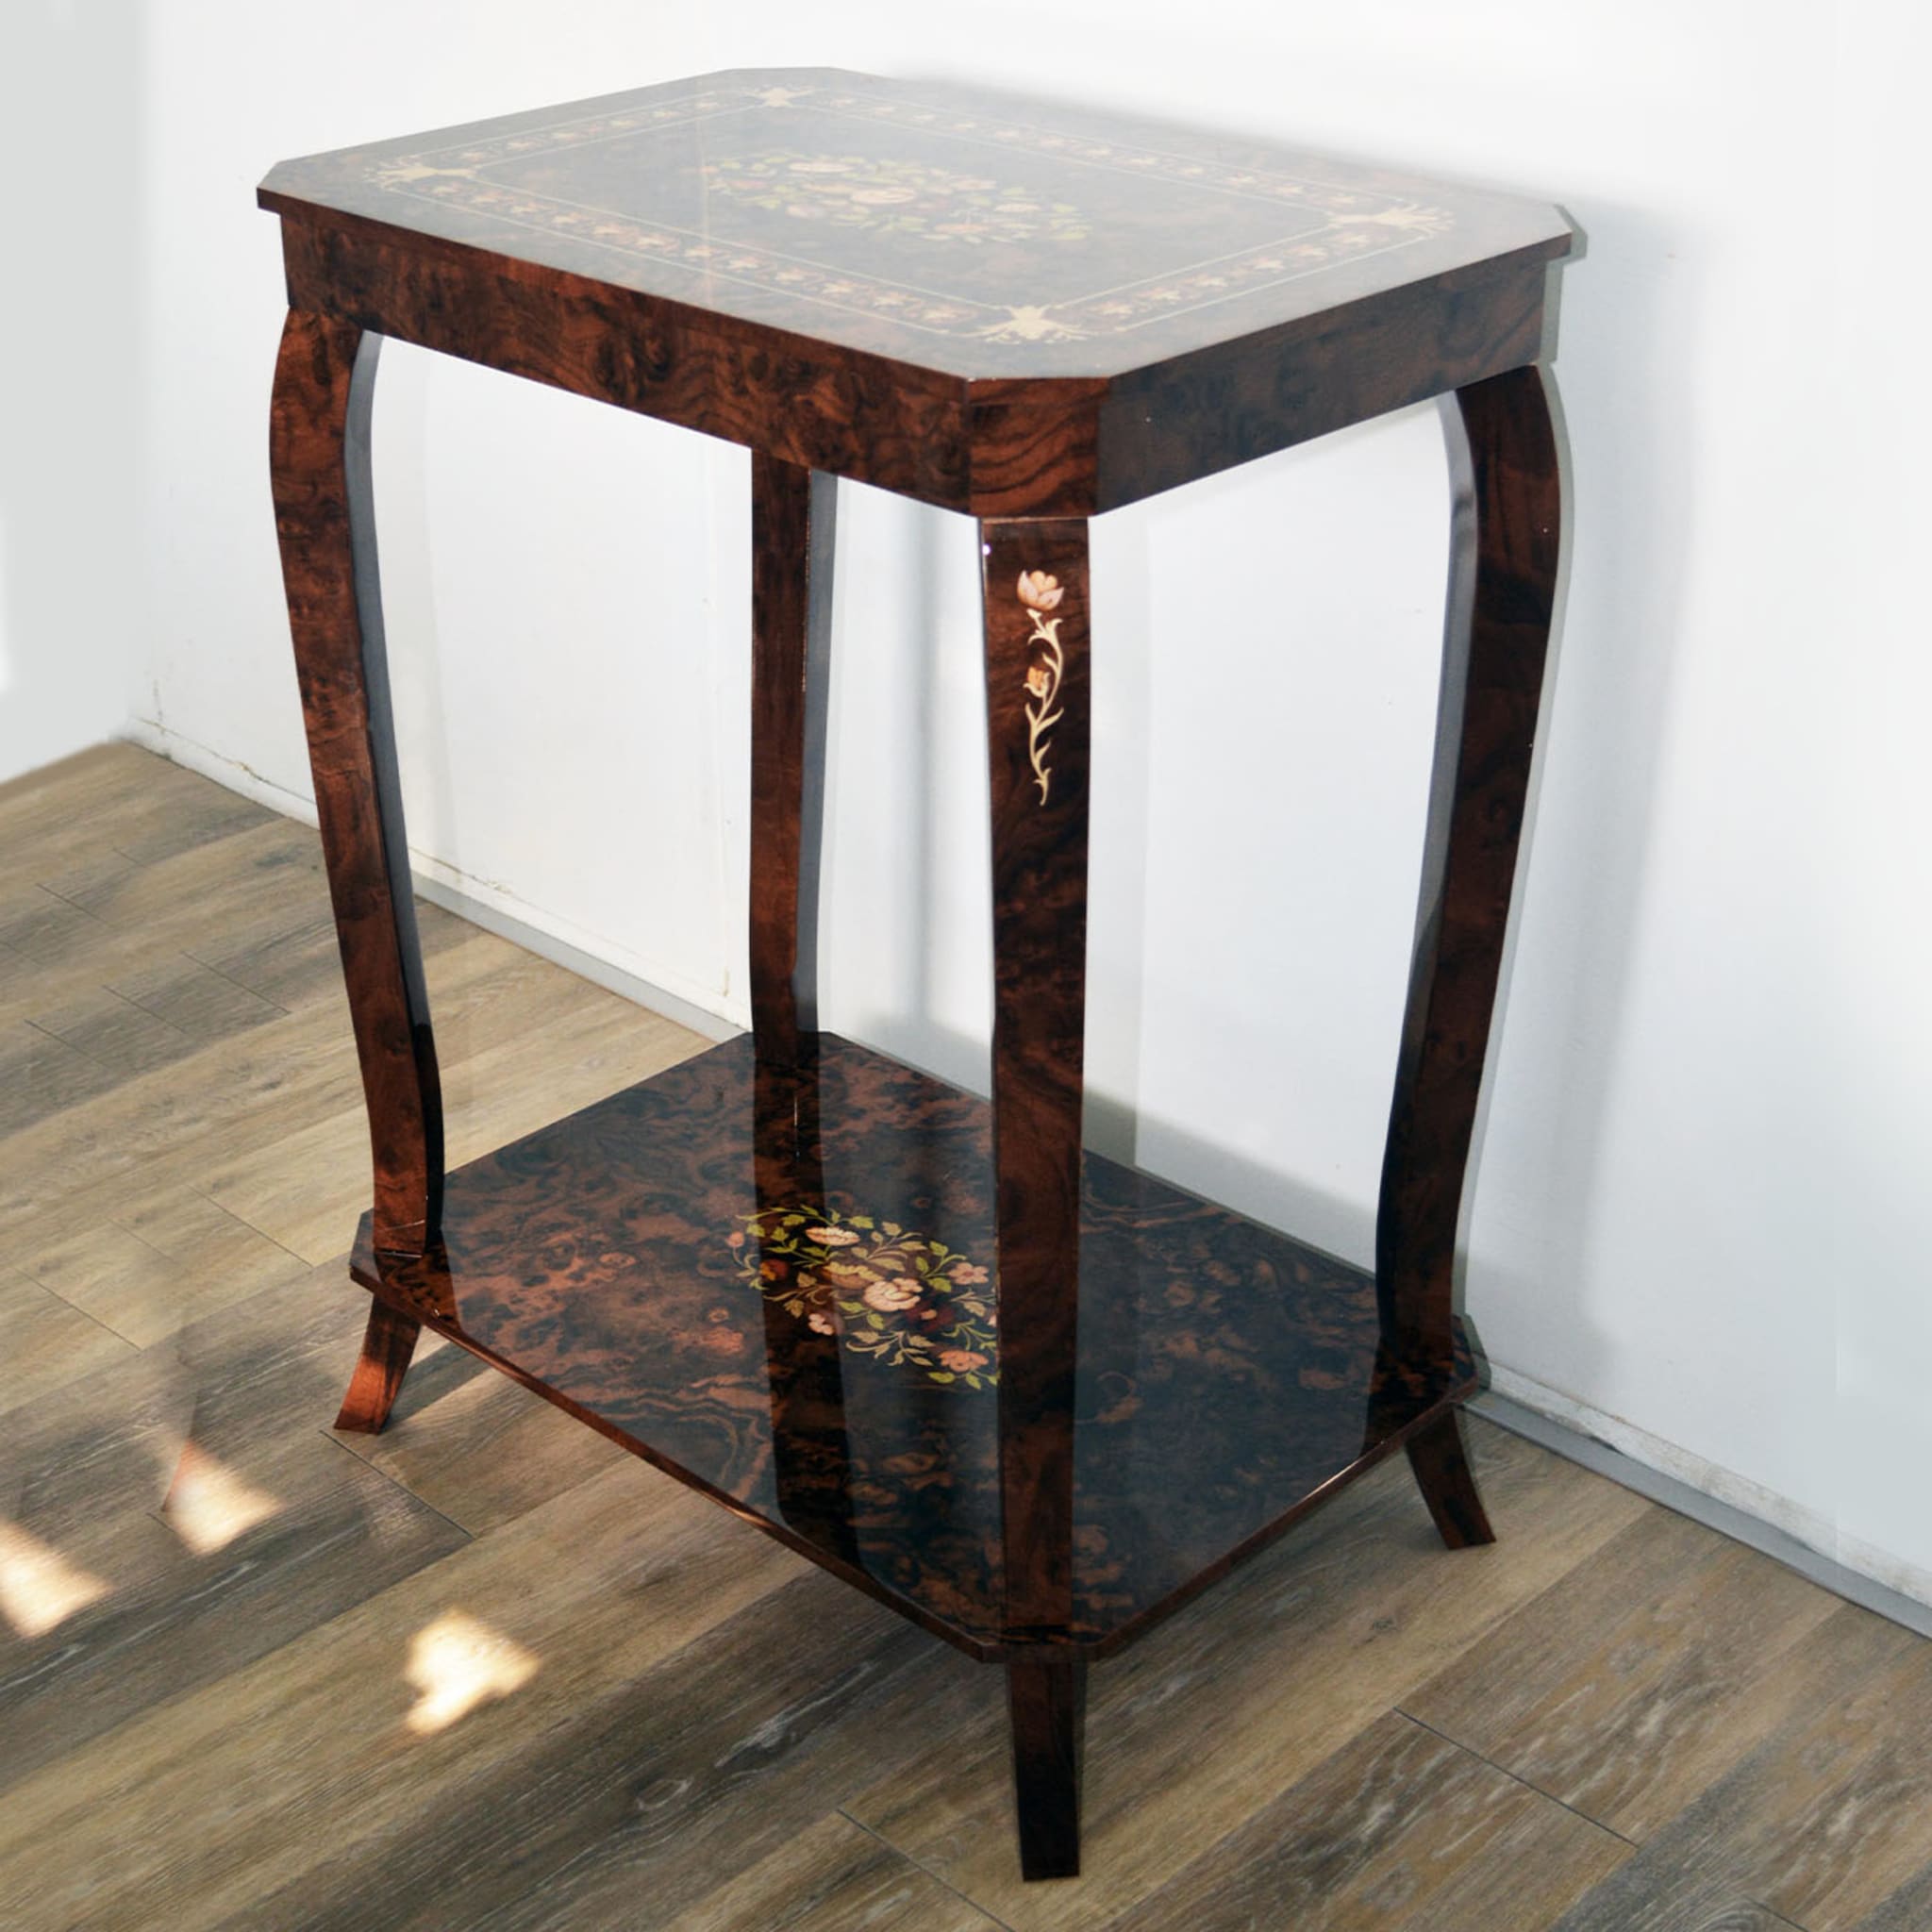 Musical Floral Briar Side Table with Storage Unit - Alternative view 5